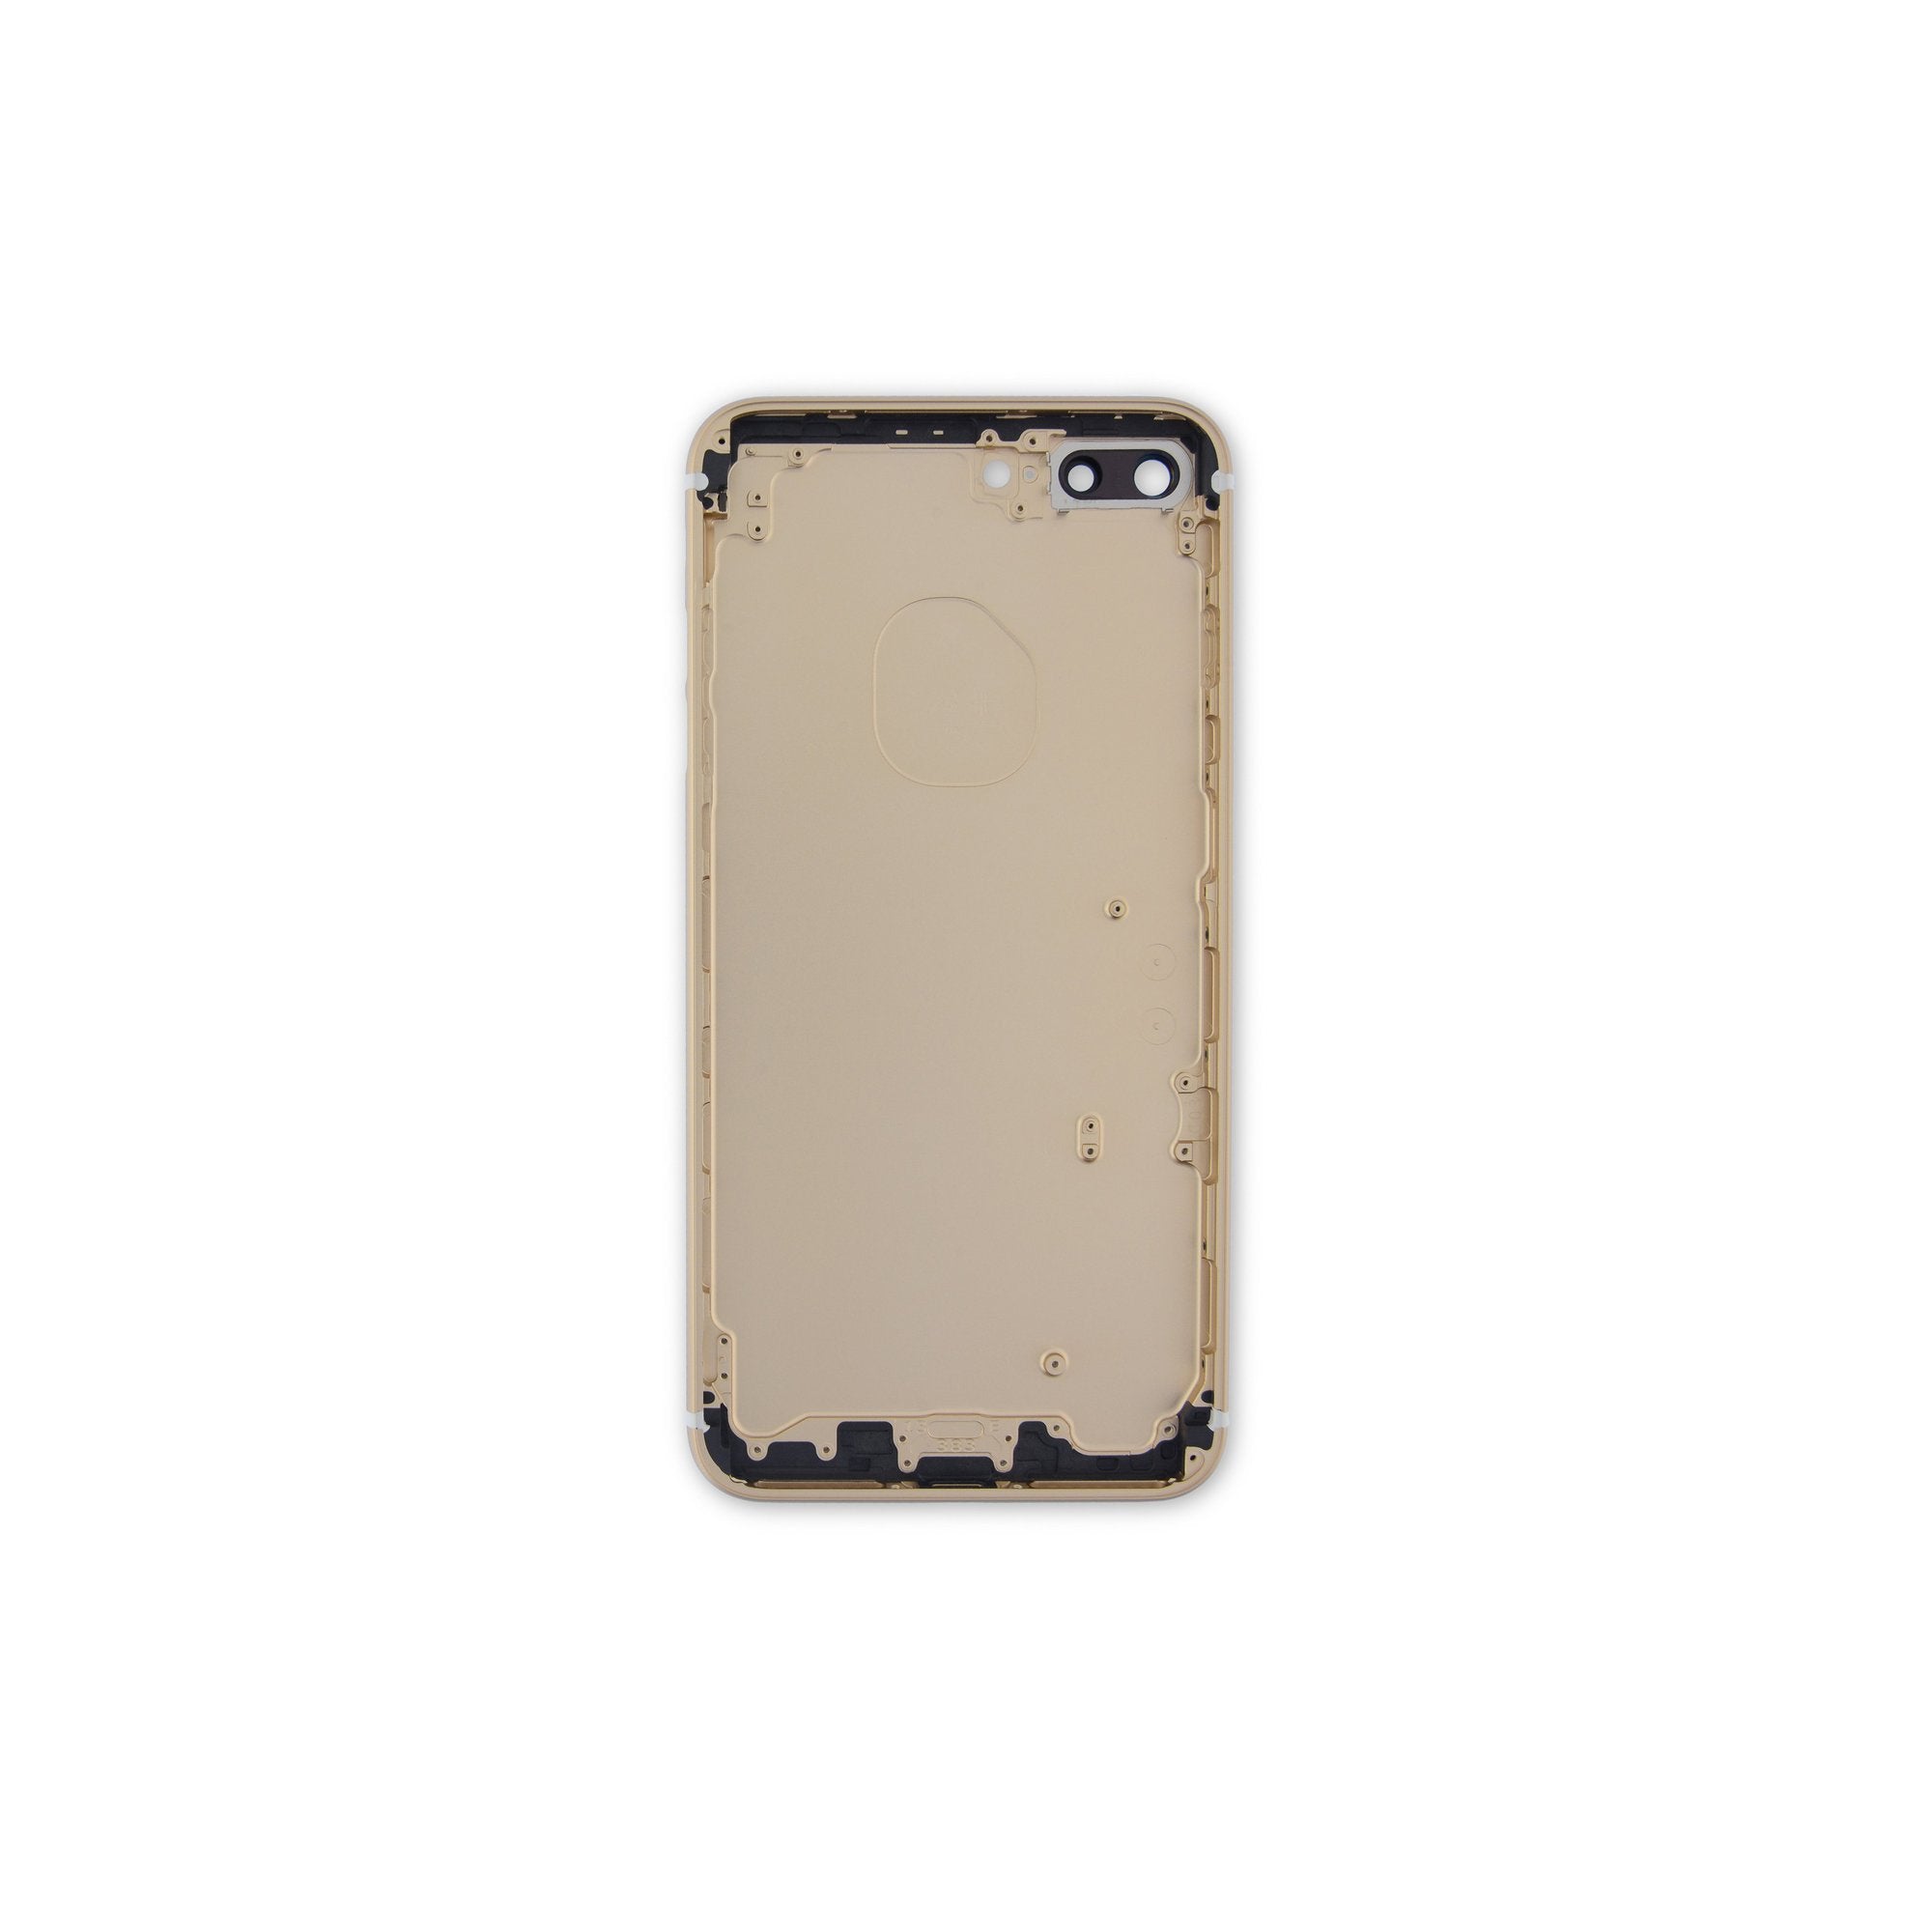 iPhone 7 Plus Blank Rear Case Gold New